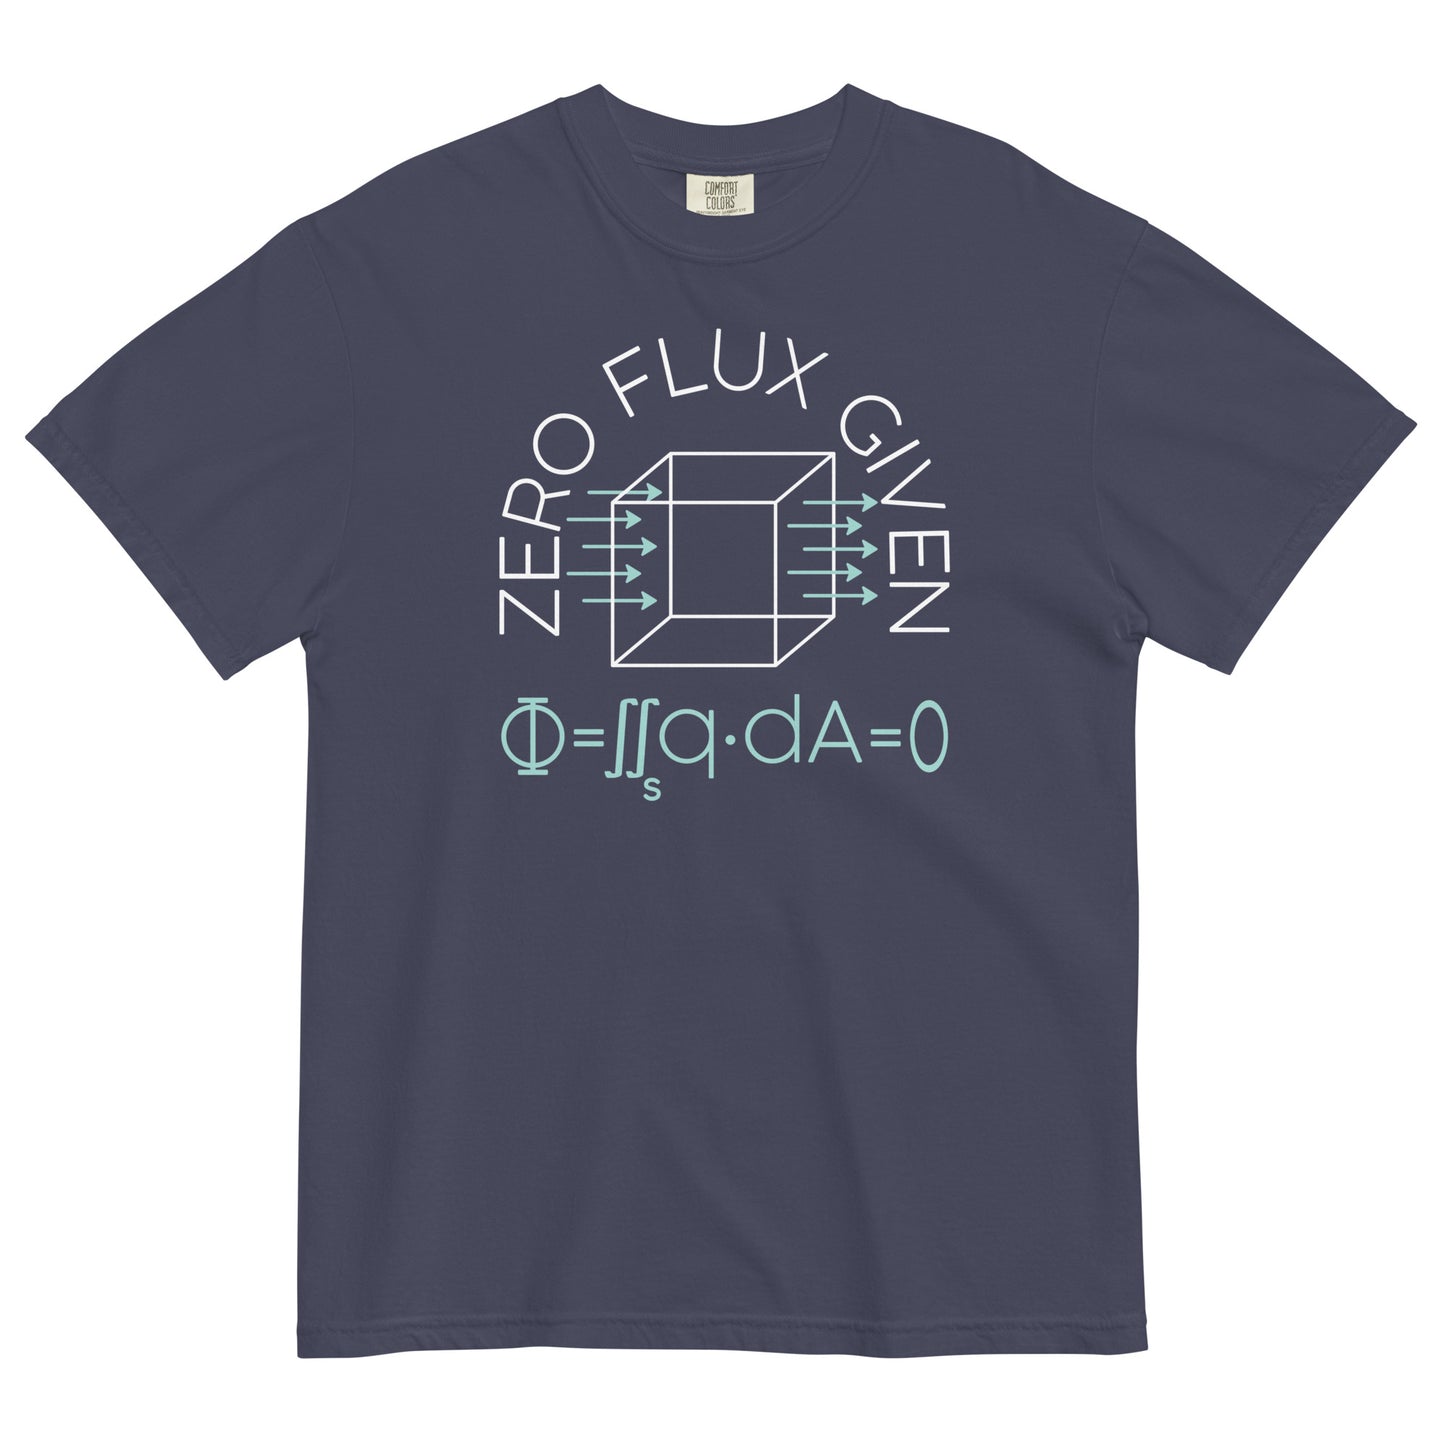 Zero Flux Given Men's Relaxed Fit Tee